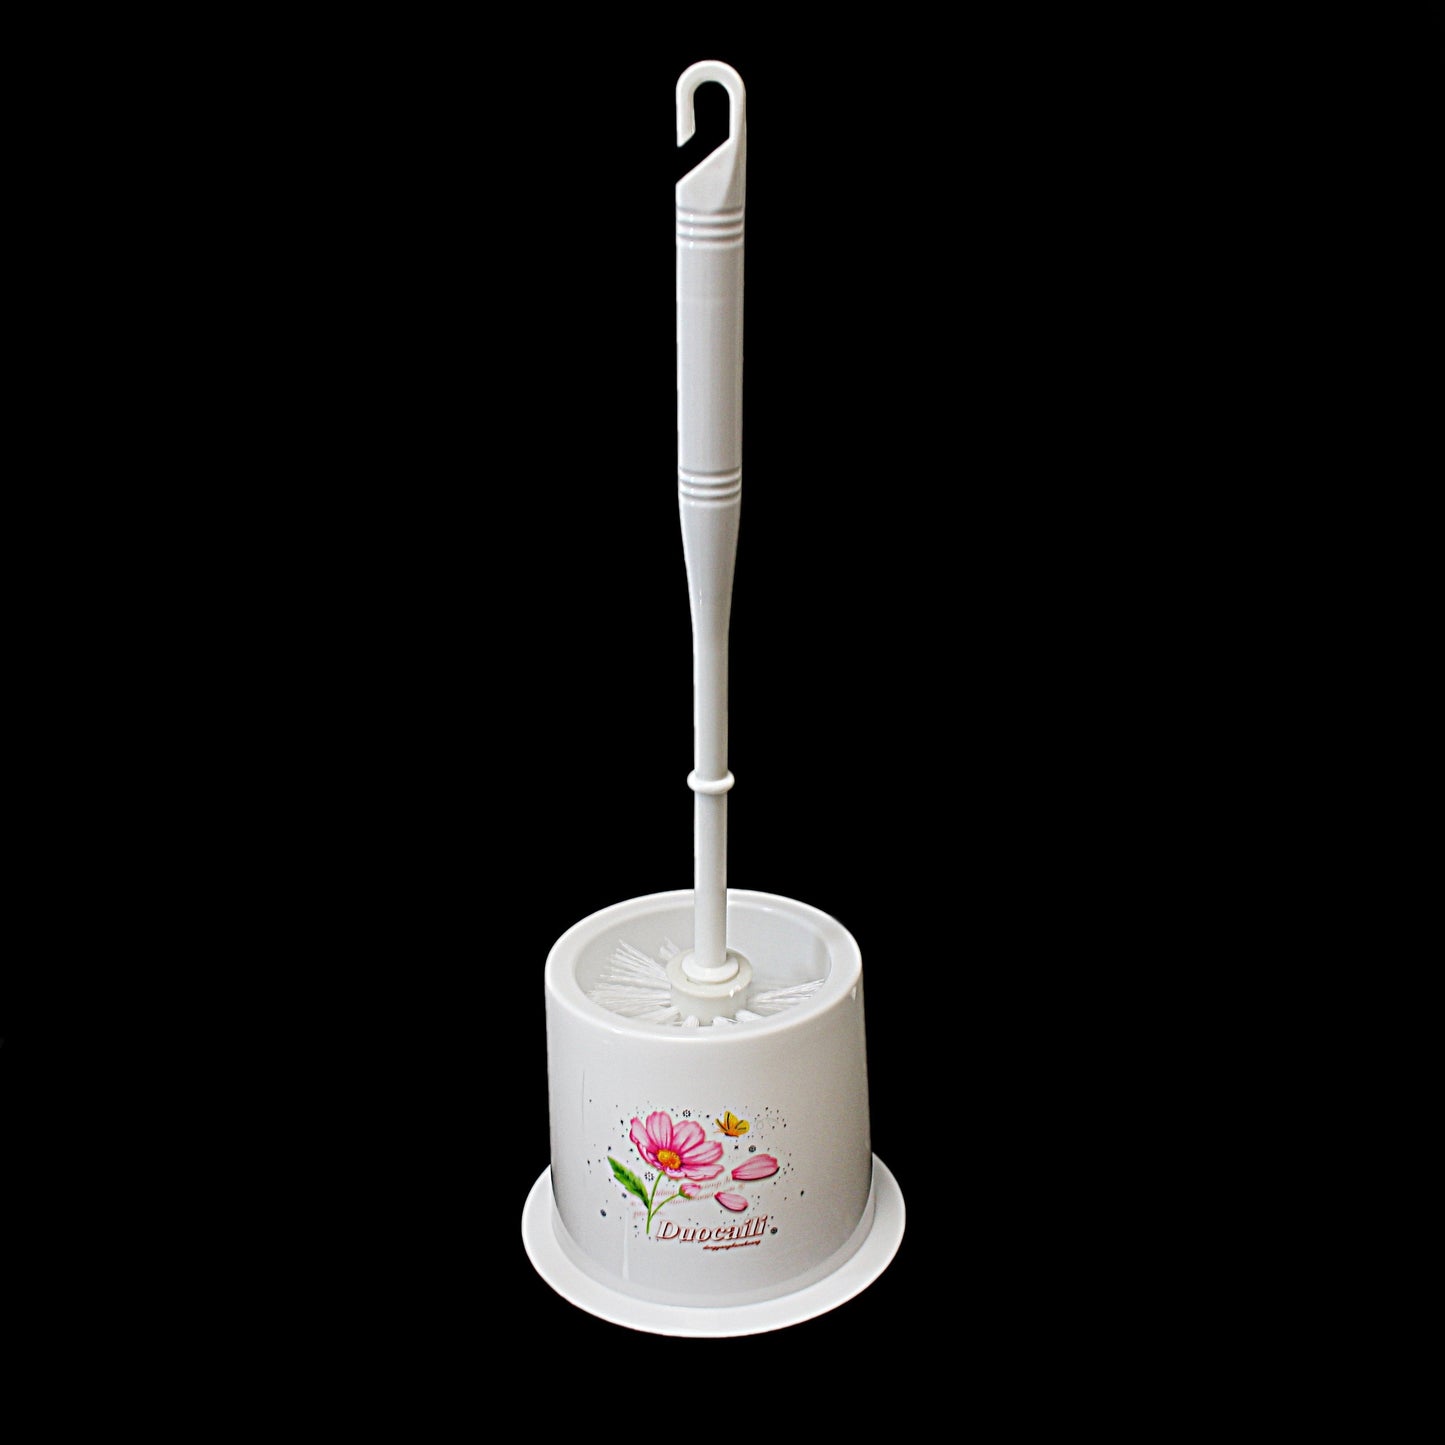 Bathroom Plastic Toilet Brush and Holder with Floral Print Design 0406 A (Parcel Rate)